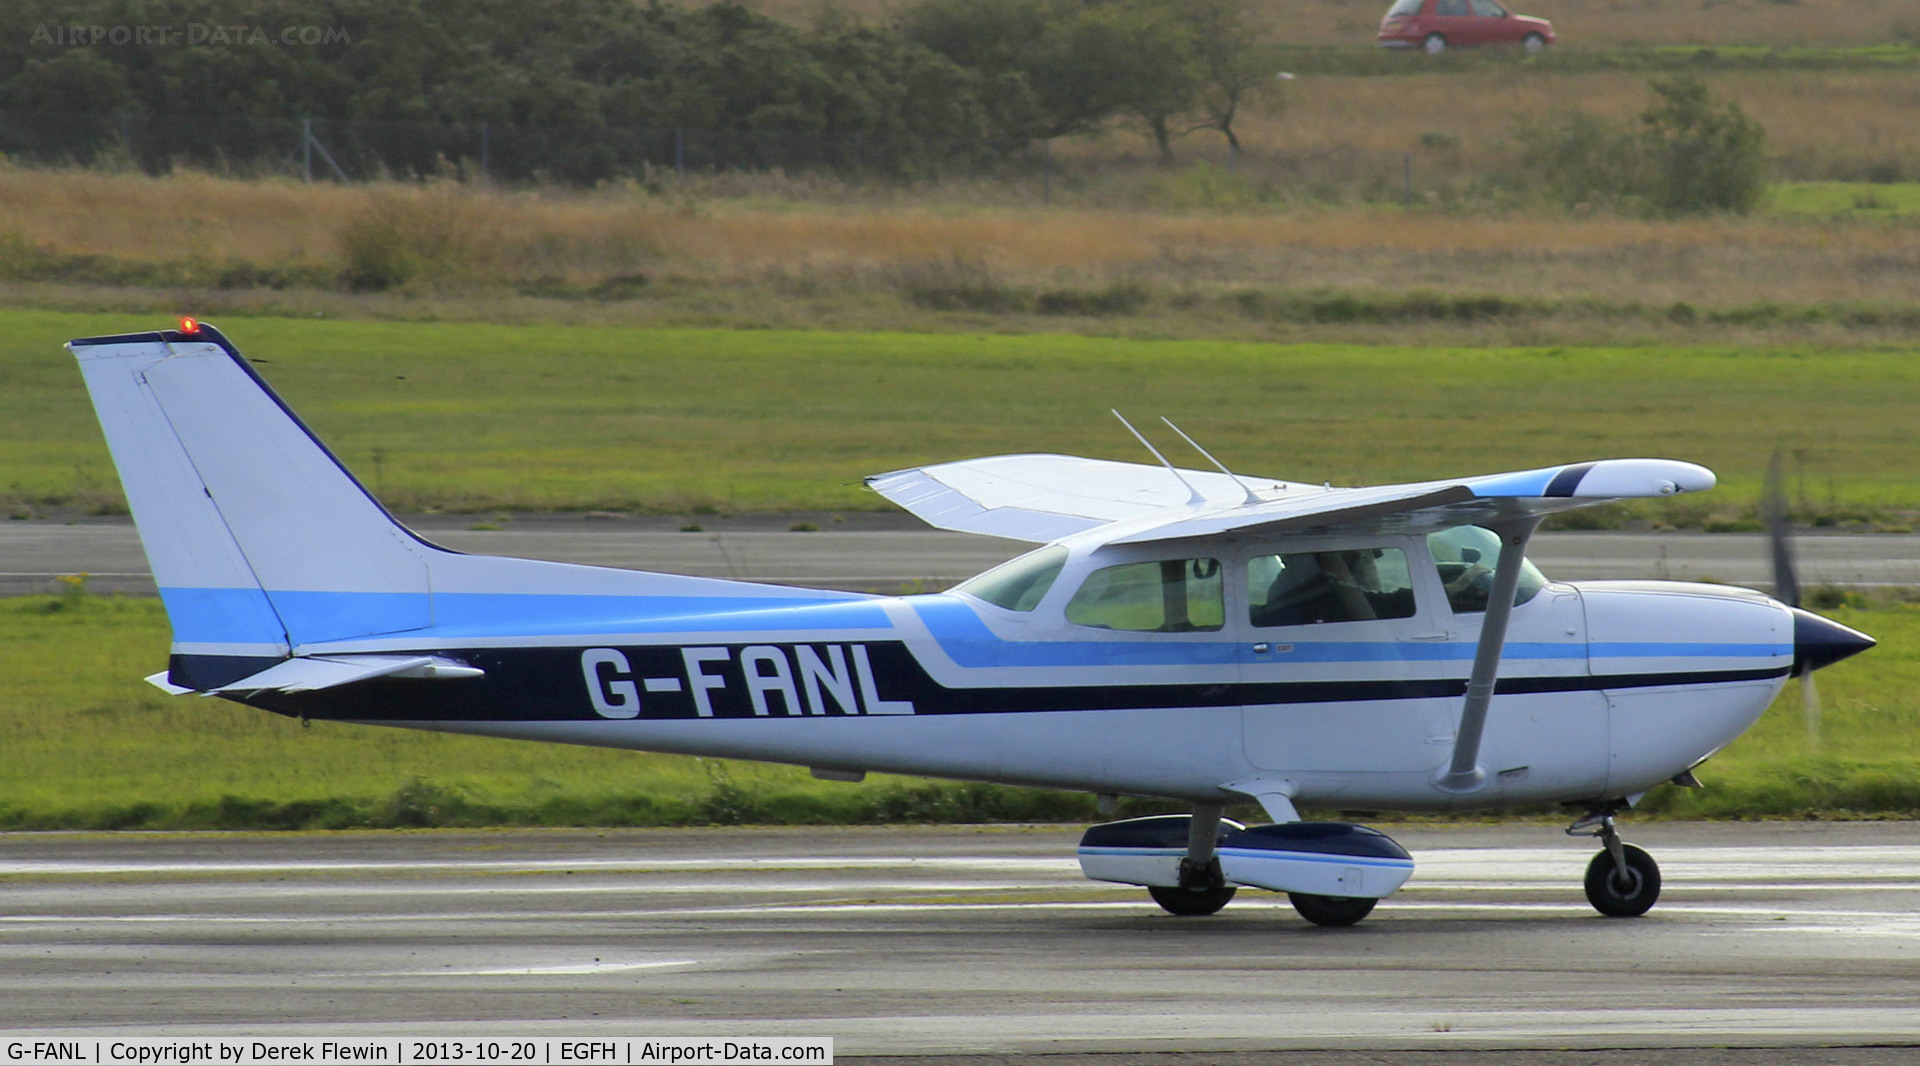 G-FANL, 1978 Cessna R172K Hawk XP C/N R172-2873, Cessna R172K from EGFE seen just about to park up at EGFH.